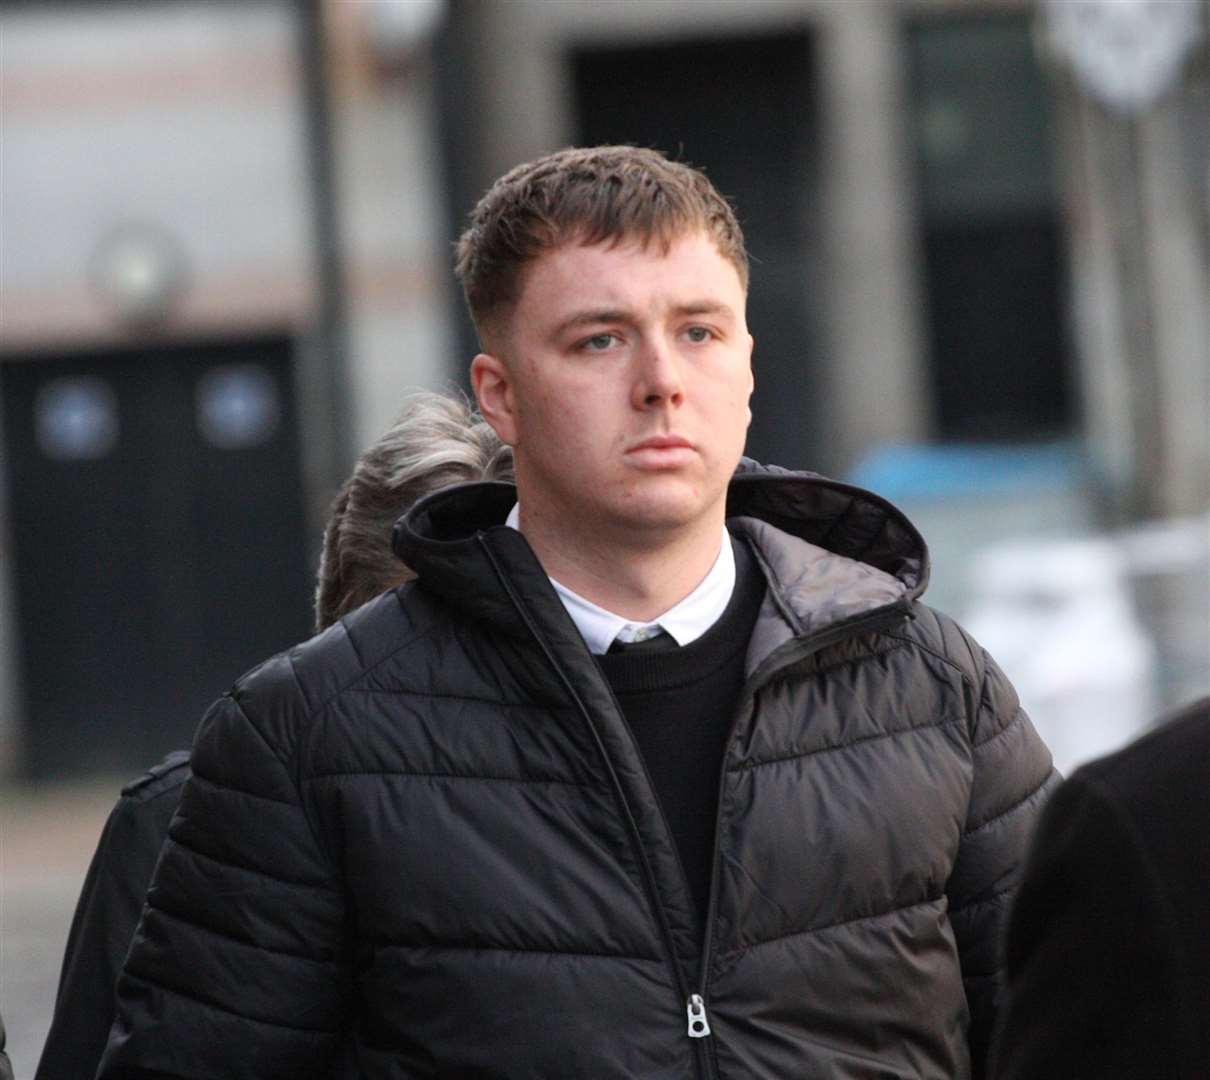 Mikey Durdle has been sentenced to three years imprisonment.